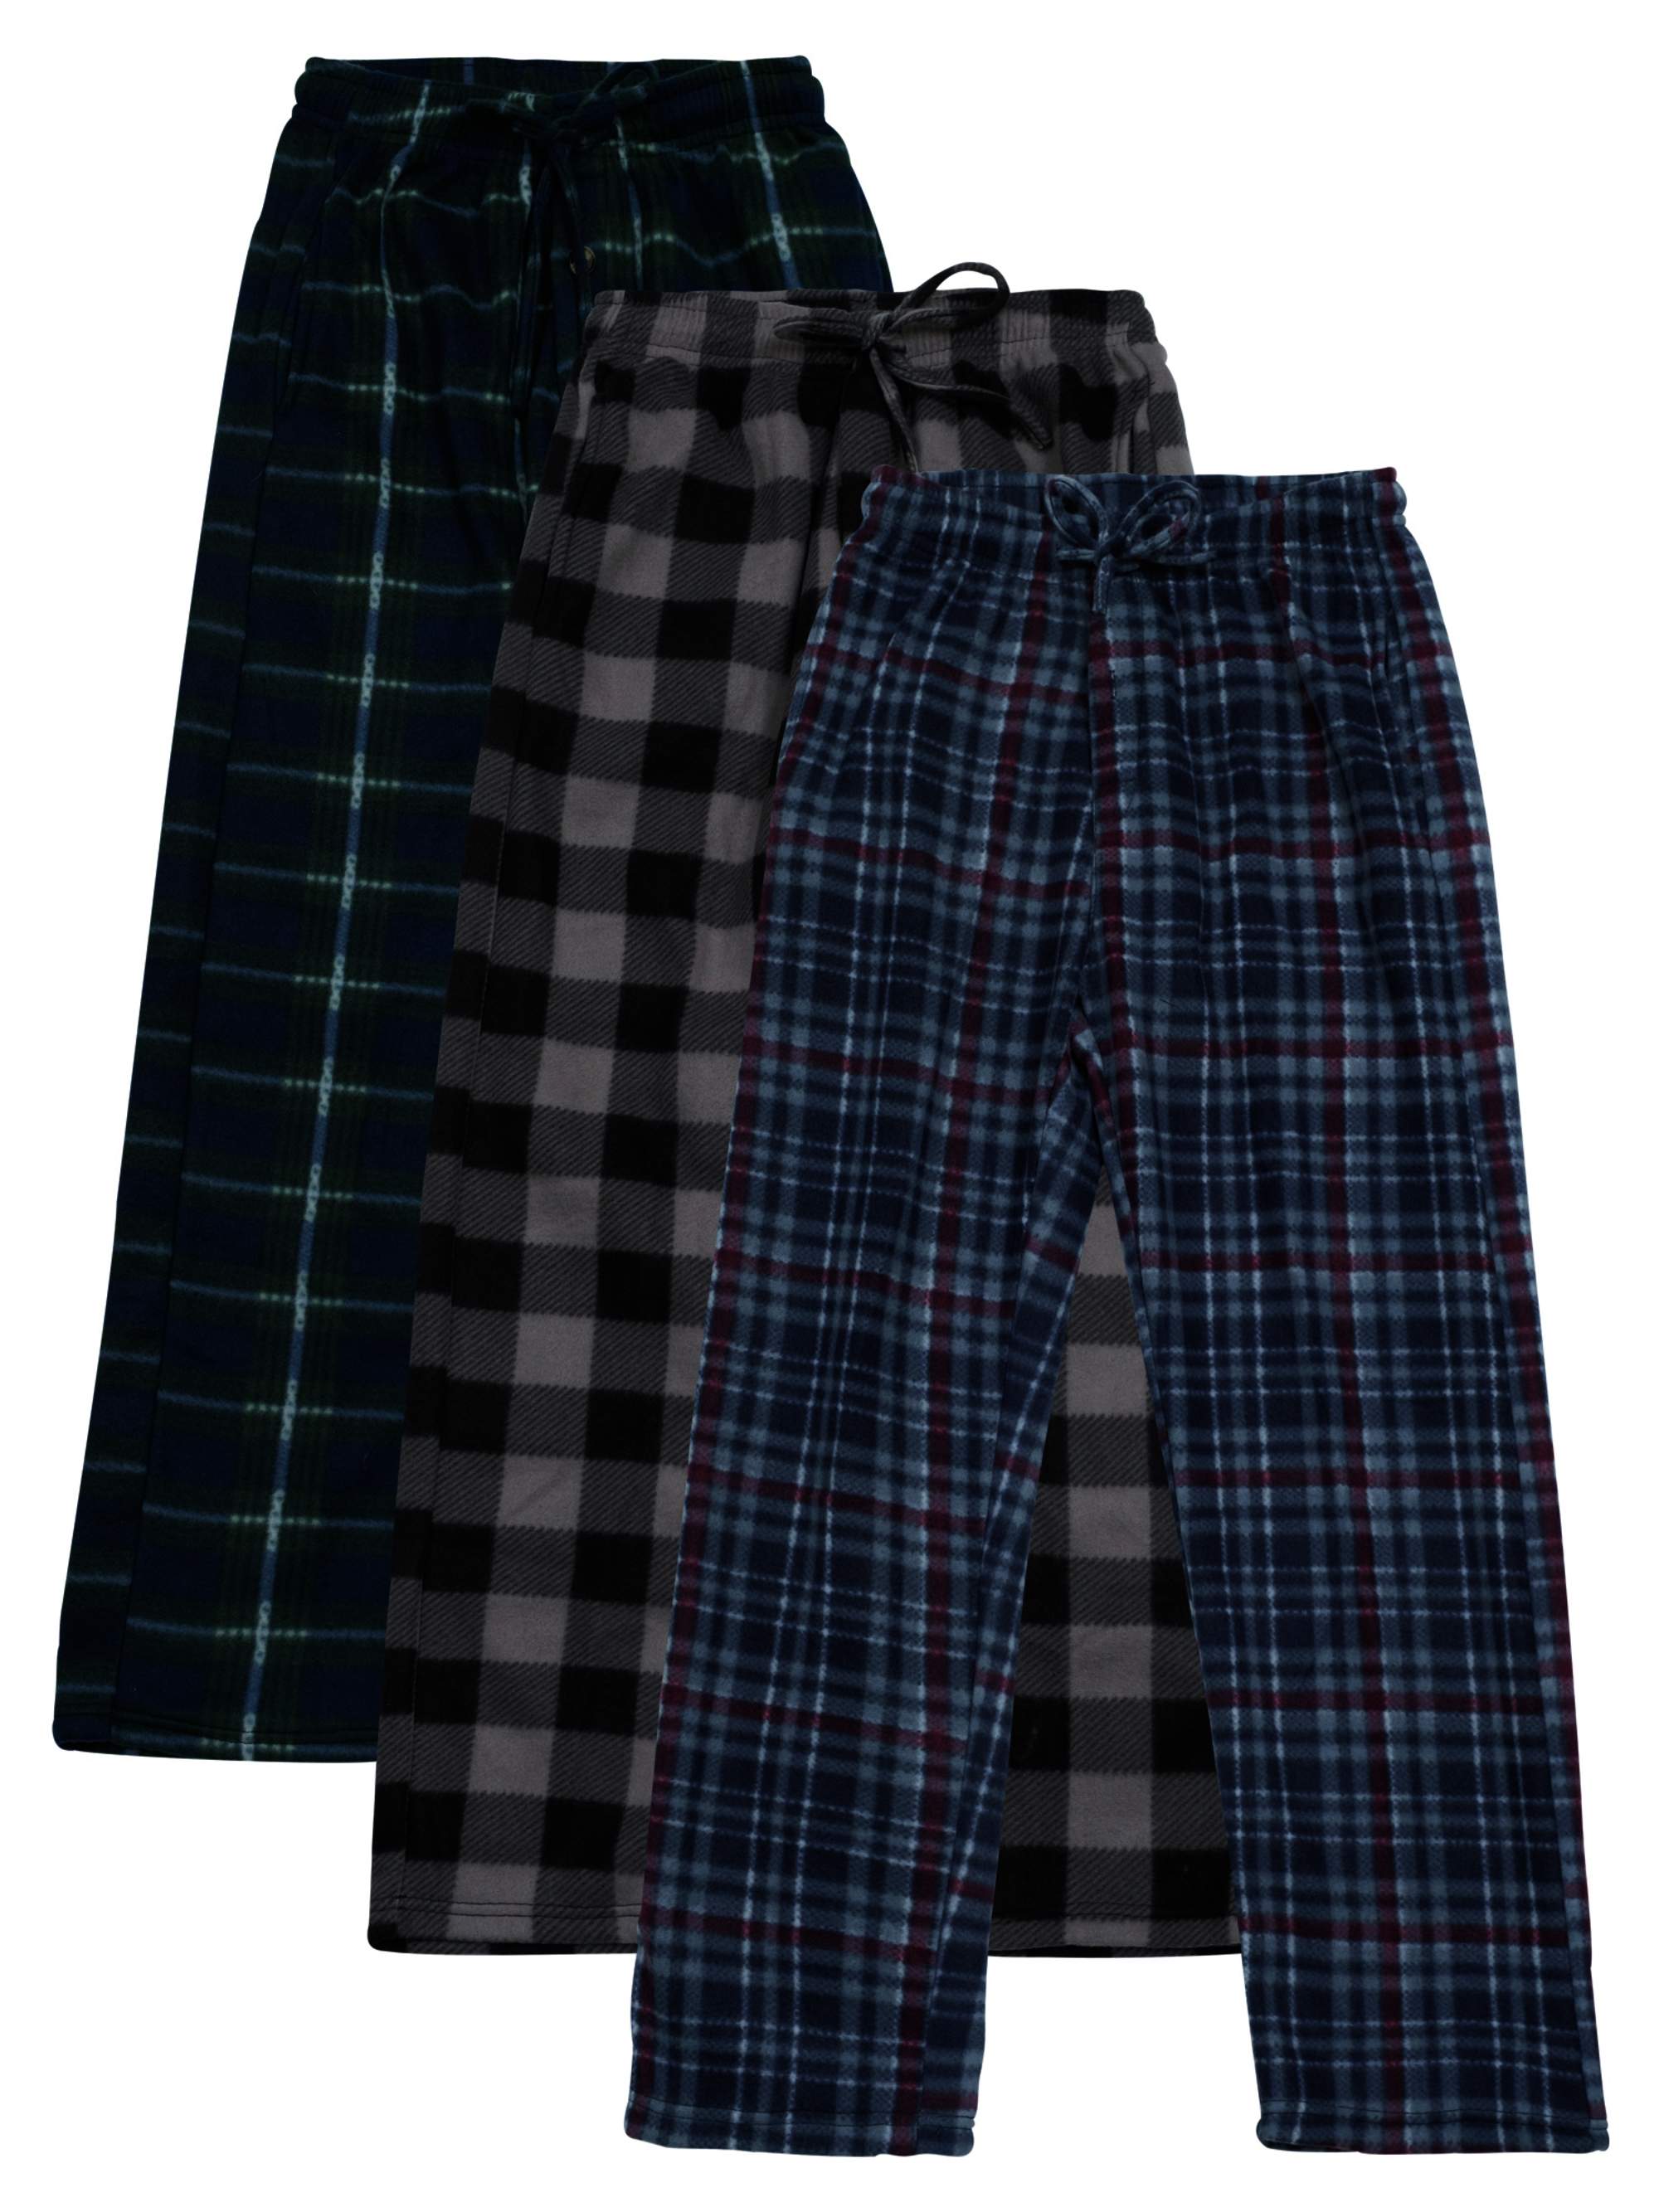 Real Essentials Boys Super-Soft Fleece 3-Pack Pajama Pant Sizes 5-18 - image 1 of 8